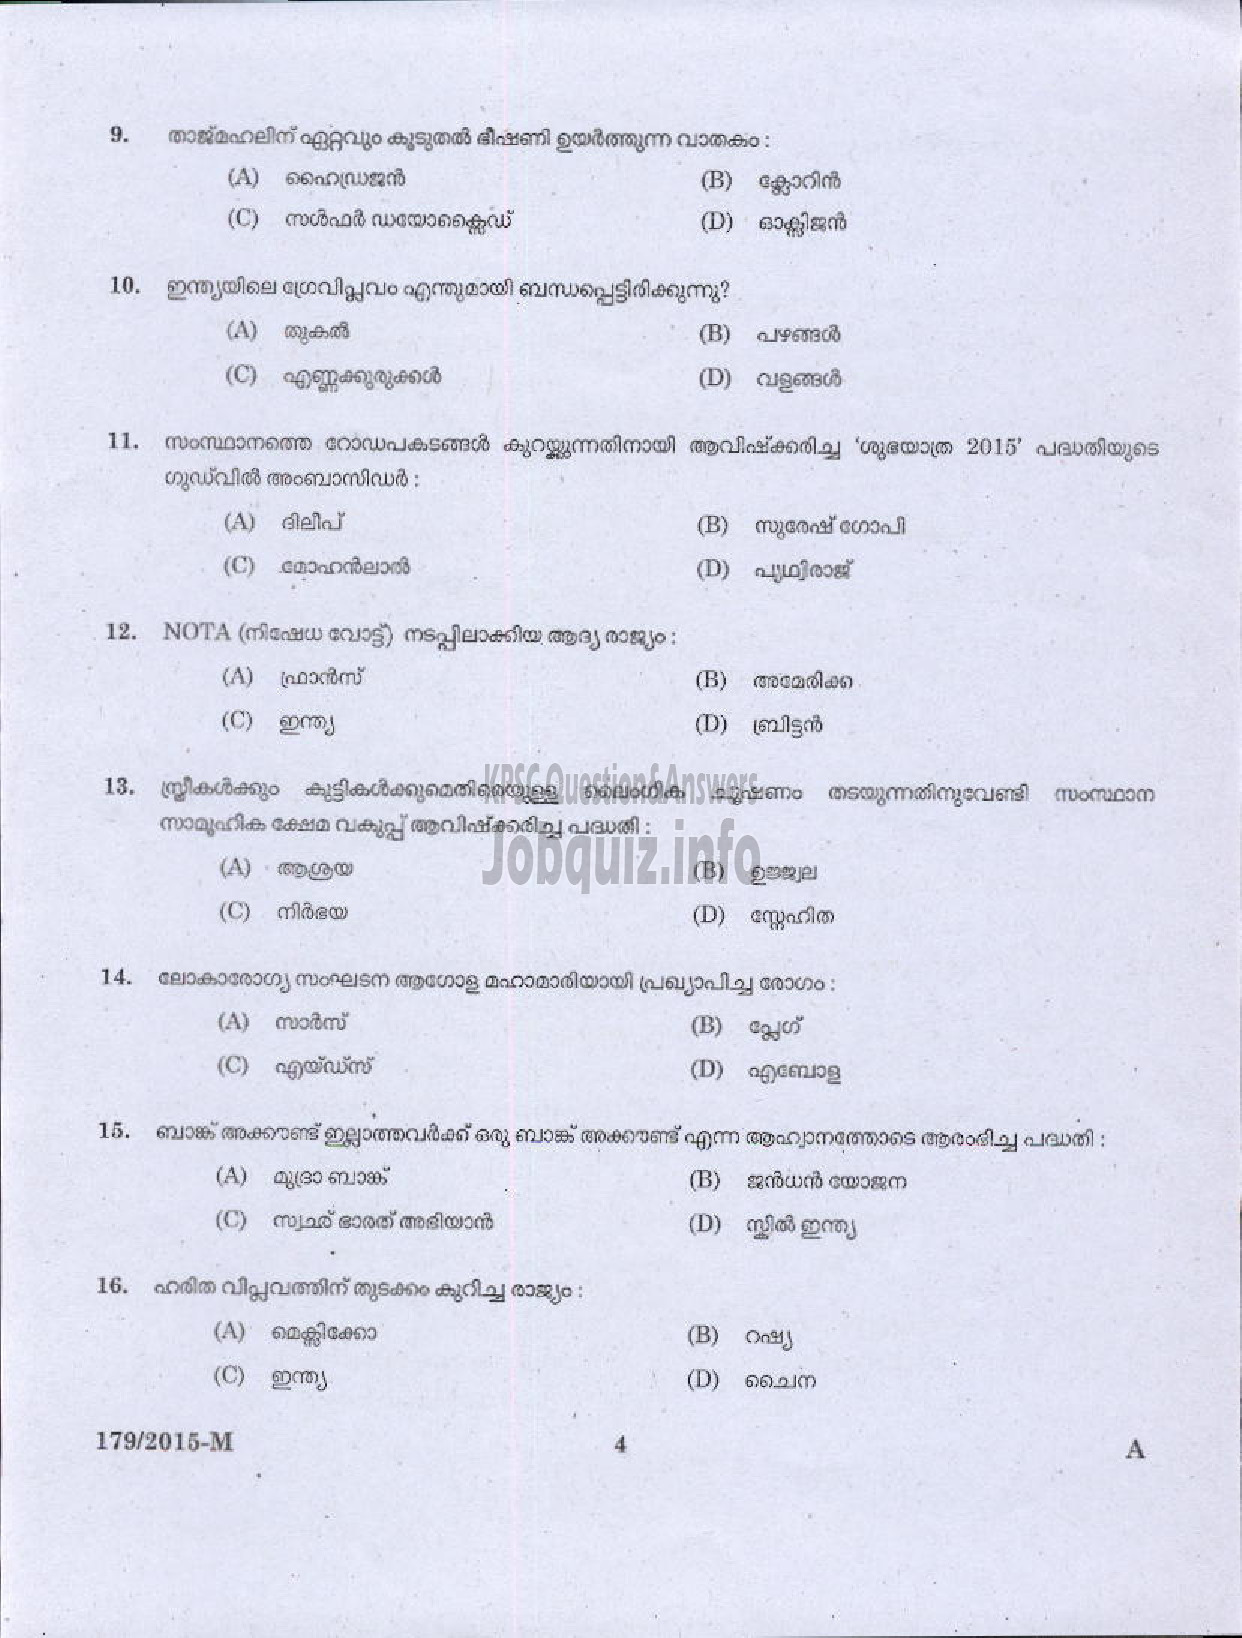 Kerala PSC Question Paper - POLICE CONSTABLE ARMED POLICE BATTALION POLICE/WOMEN POLICE CONSTABLE ARMED POLICE BATTALION POLICE ( Malayalam ) -2